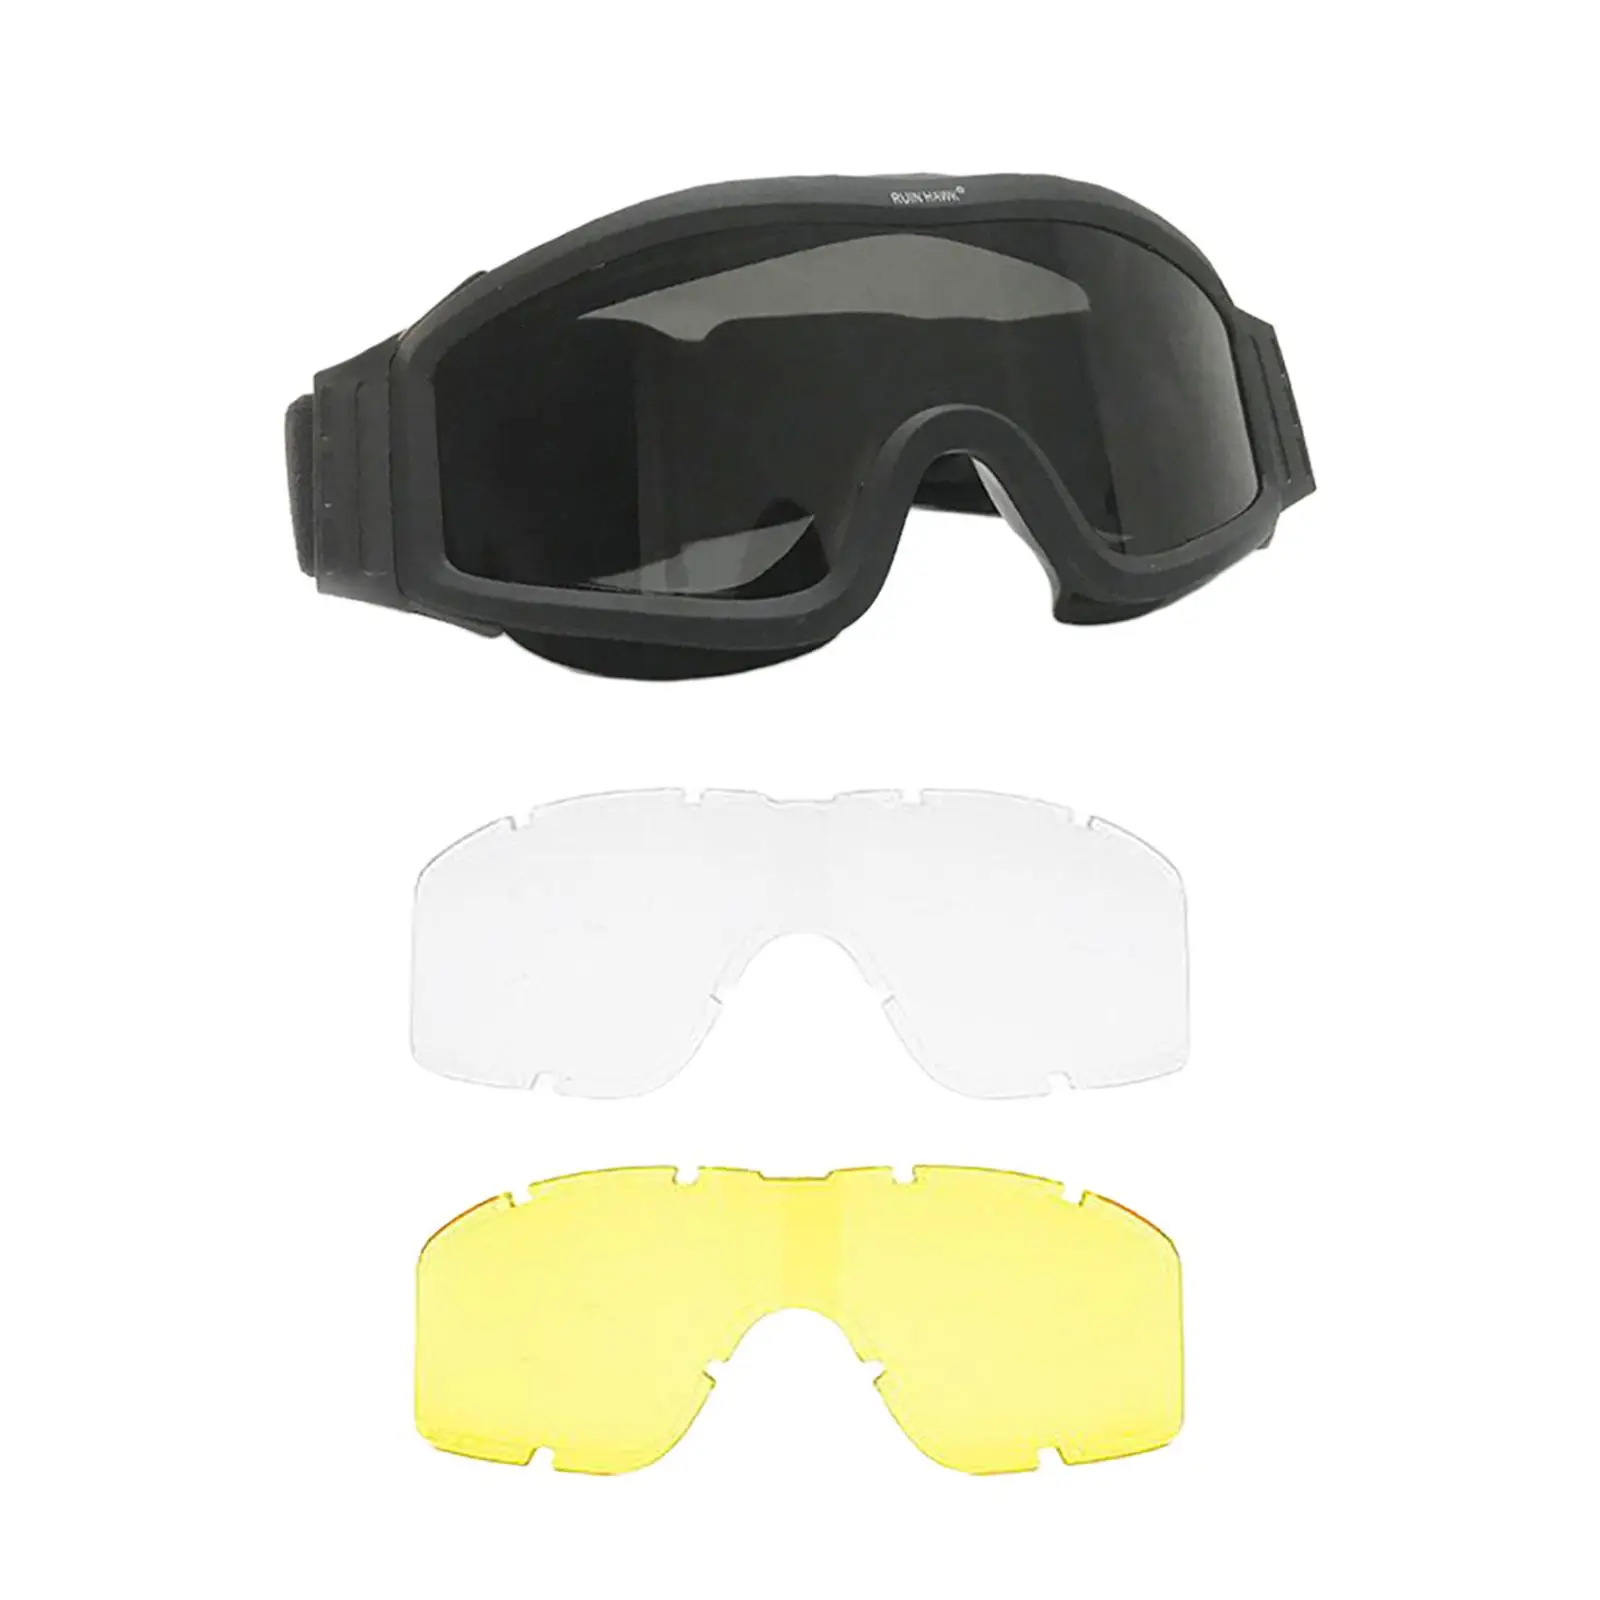 Goggles Glasses Anti UV Adjustable Scratch Resistant for Biking Shooting